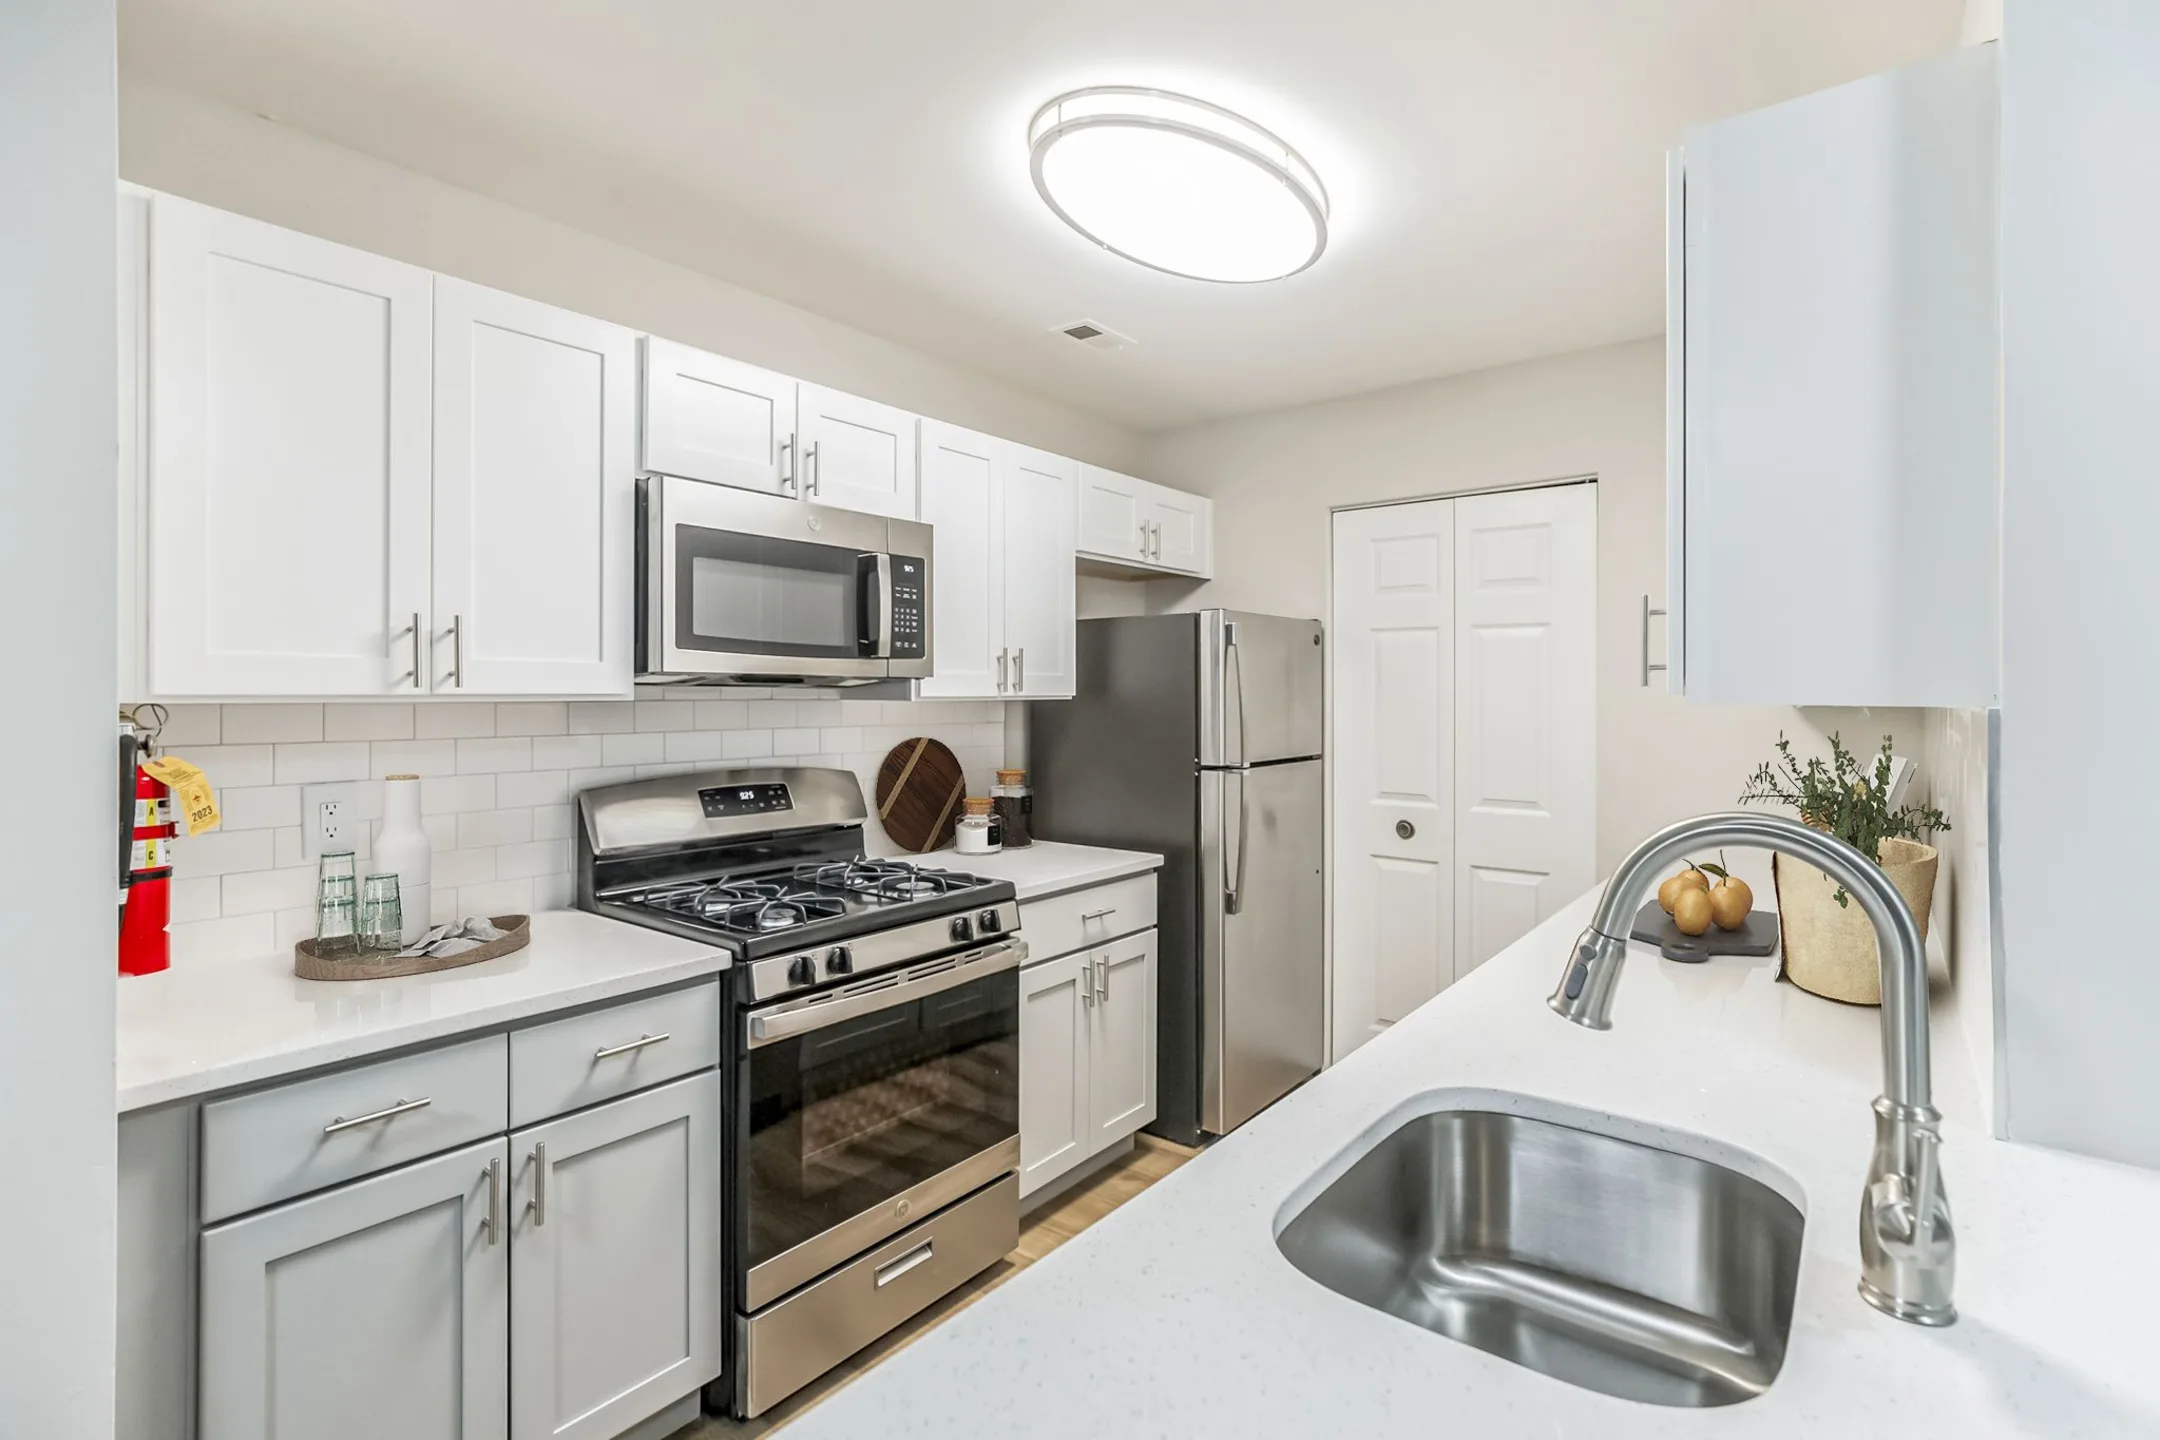 Kitchen - Eagle Rock Apartments at Freehold - Freehold, NJ